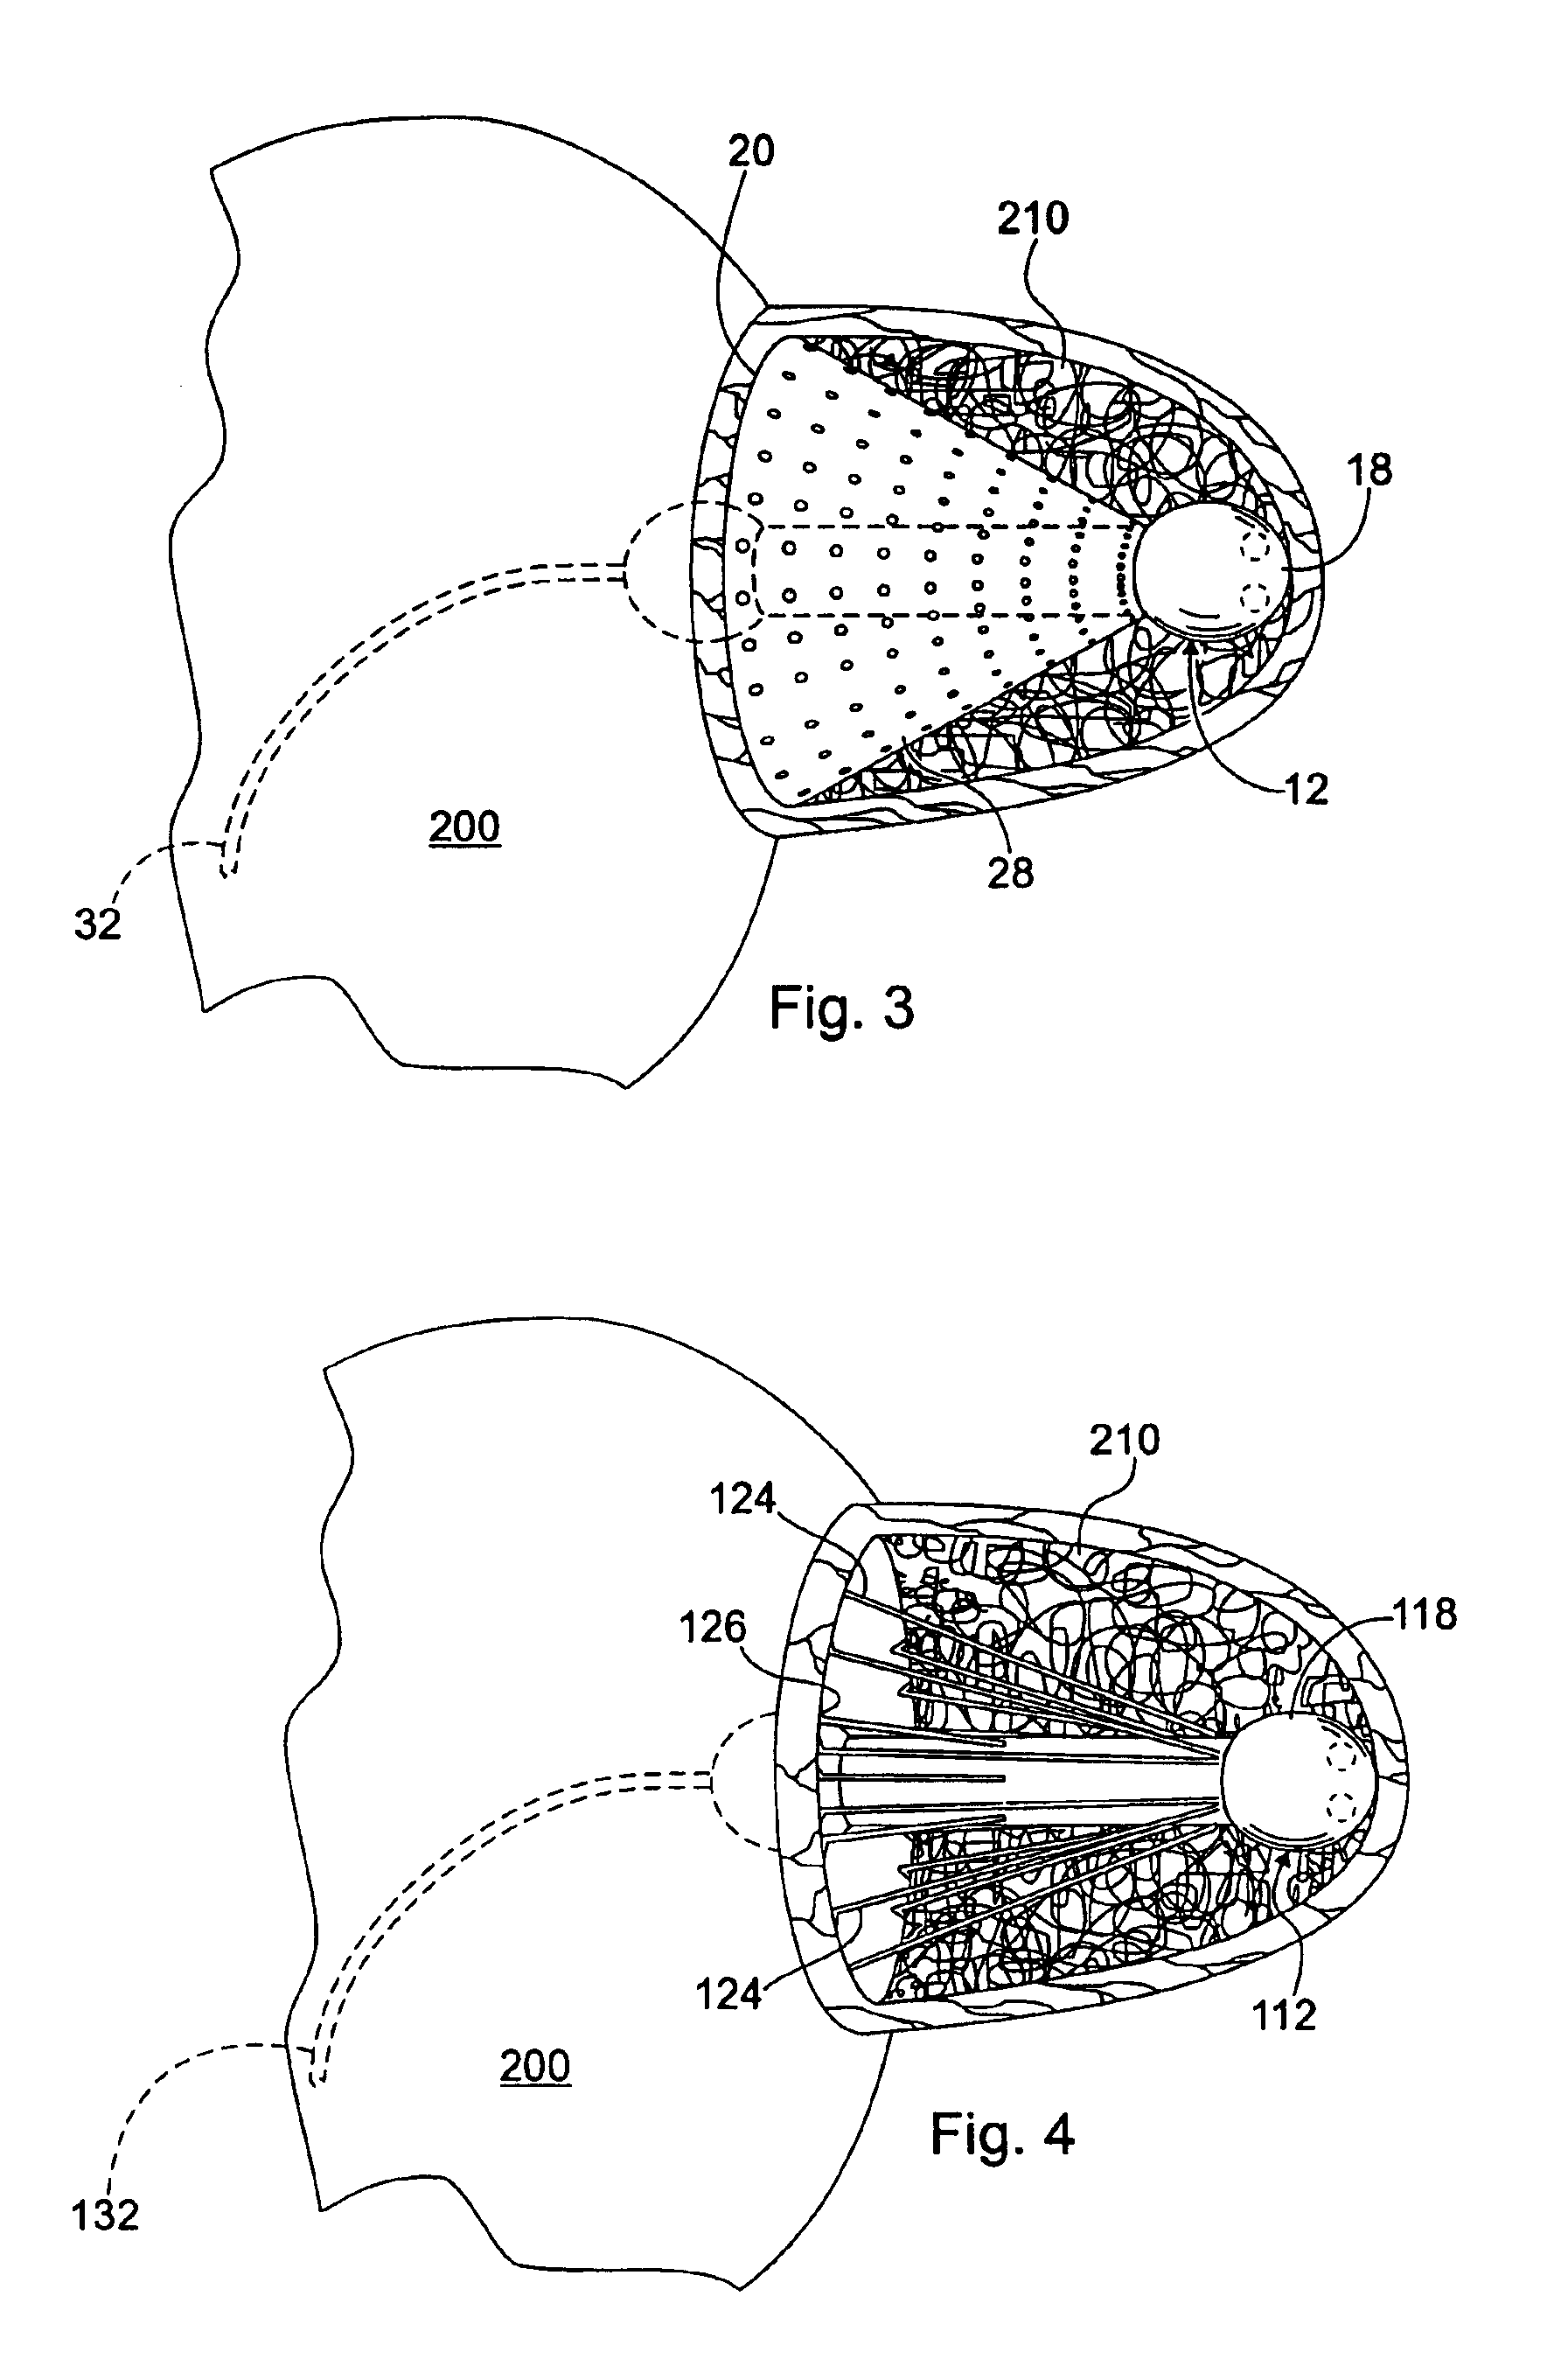 Cardiac stimulating apparatus having a blood clot filter and atrial pacer